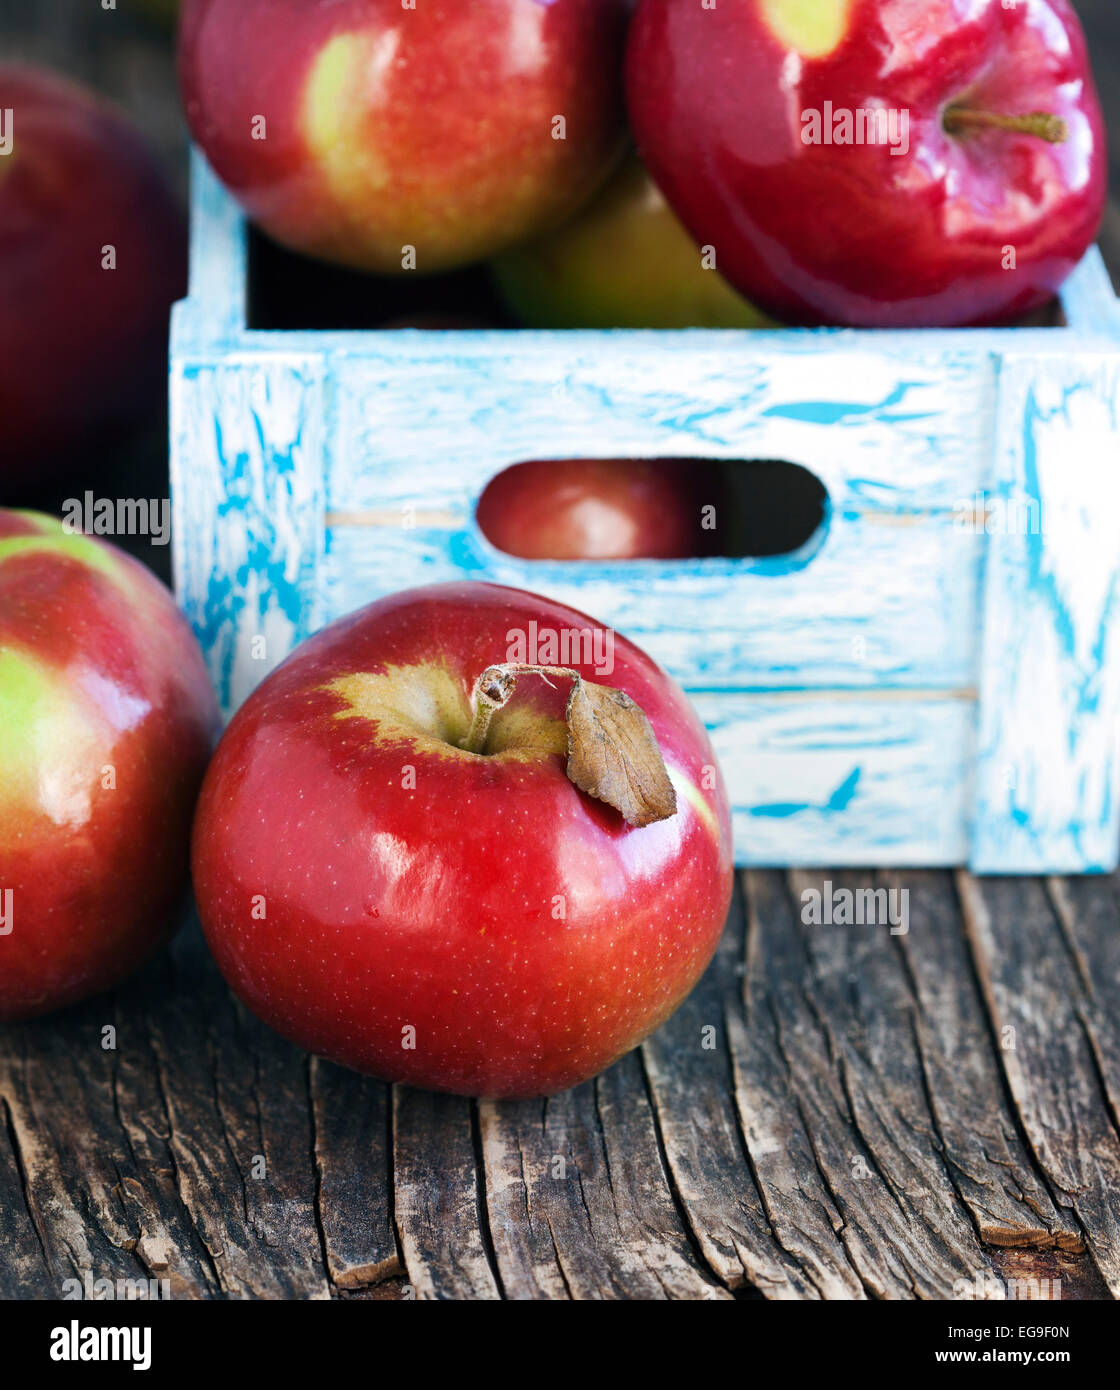 Red apples in wooden crate Stock Photo